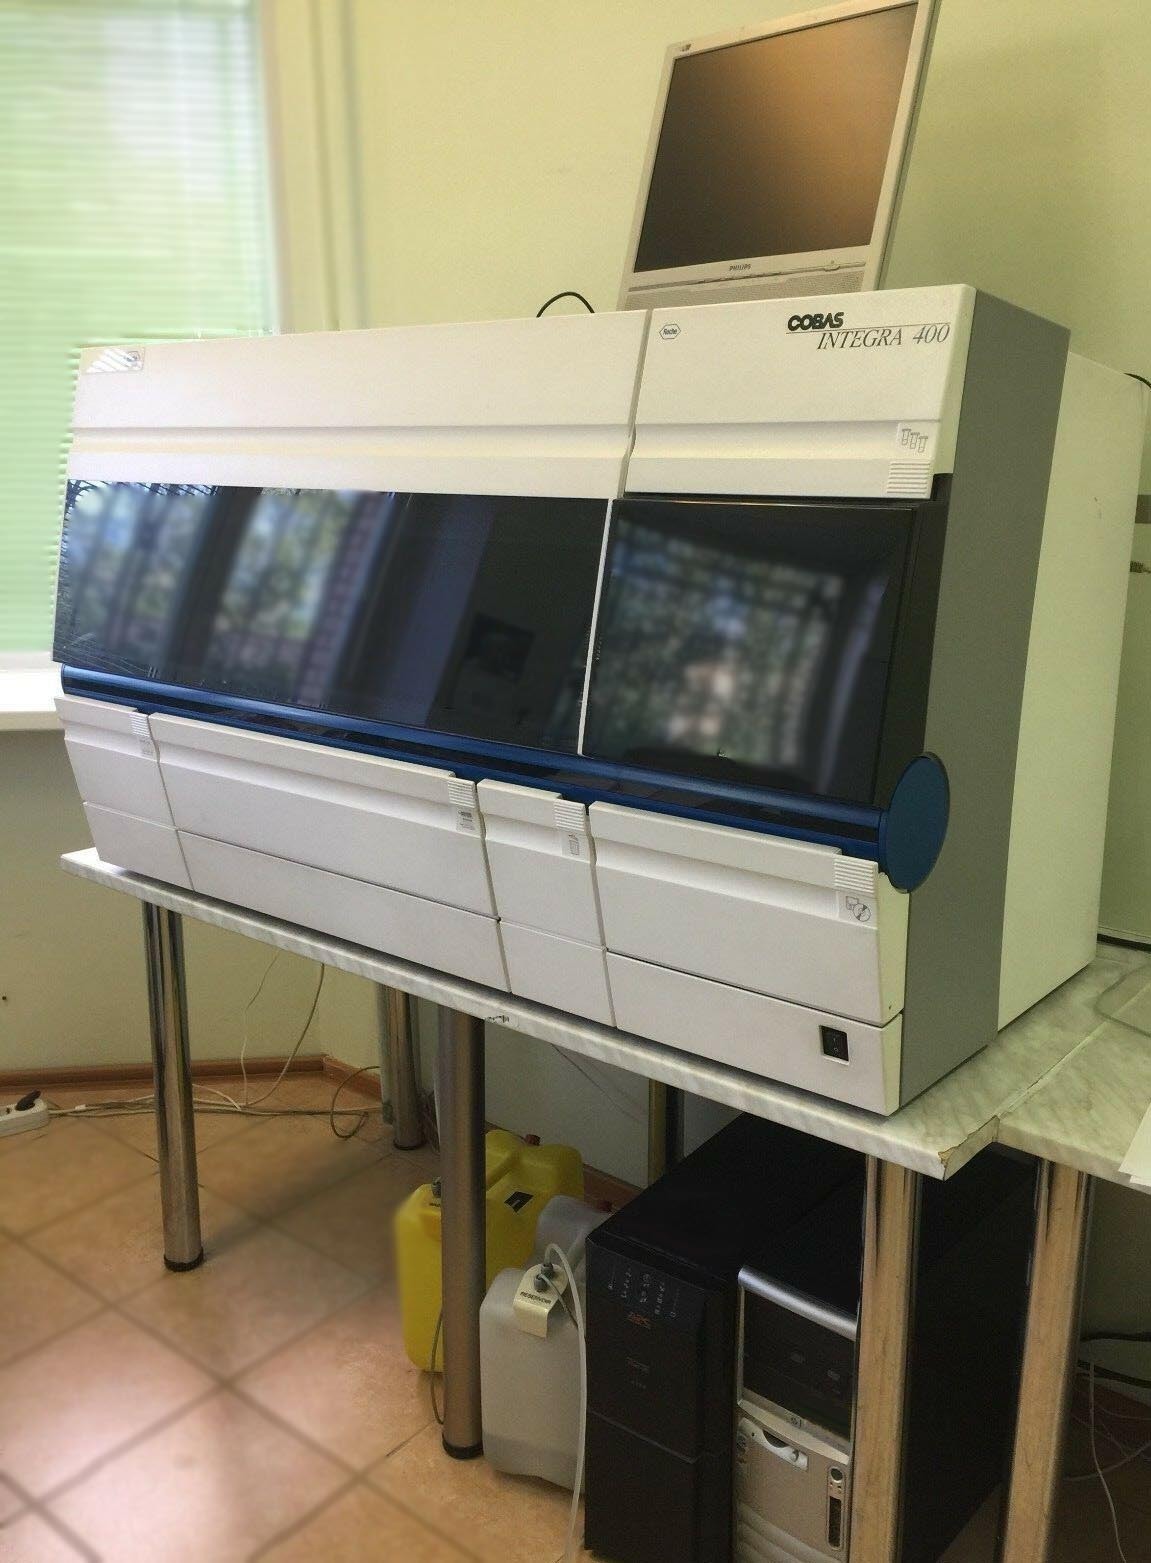 Photo Used ROCHE Cobas INTEGRA 400 For Sale